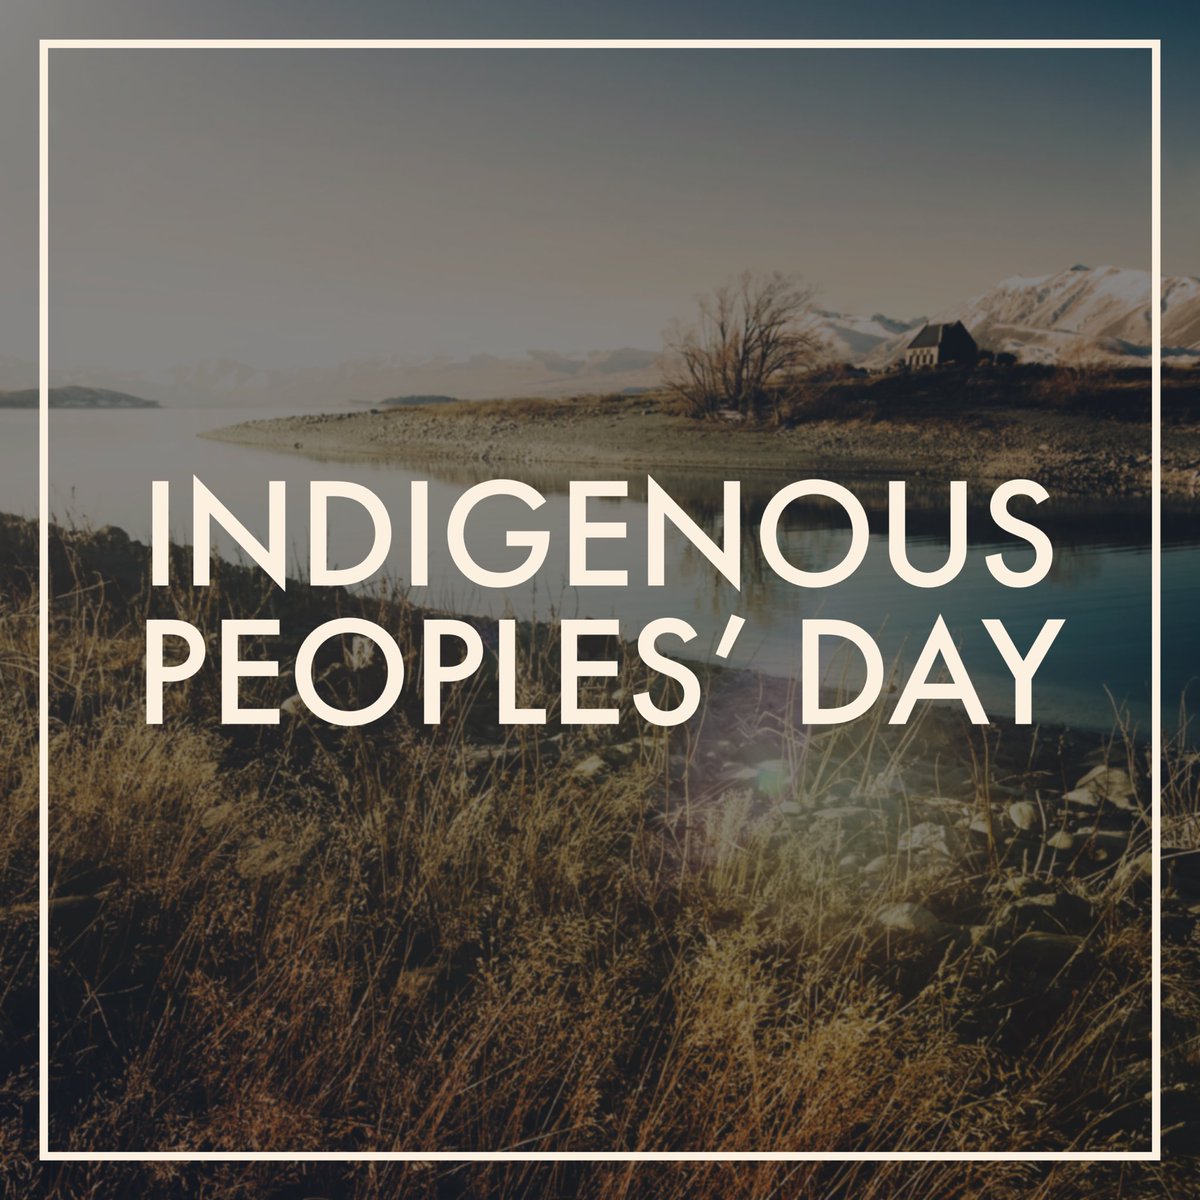 Today we honor Indigenous Peoples’ by remembering their histories and celebrating their cultures that enrich our society.